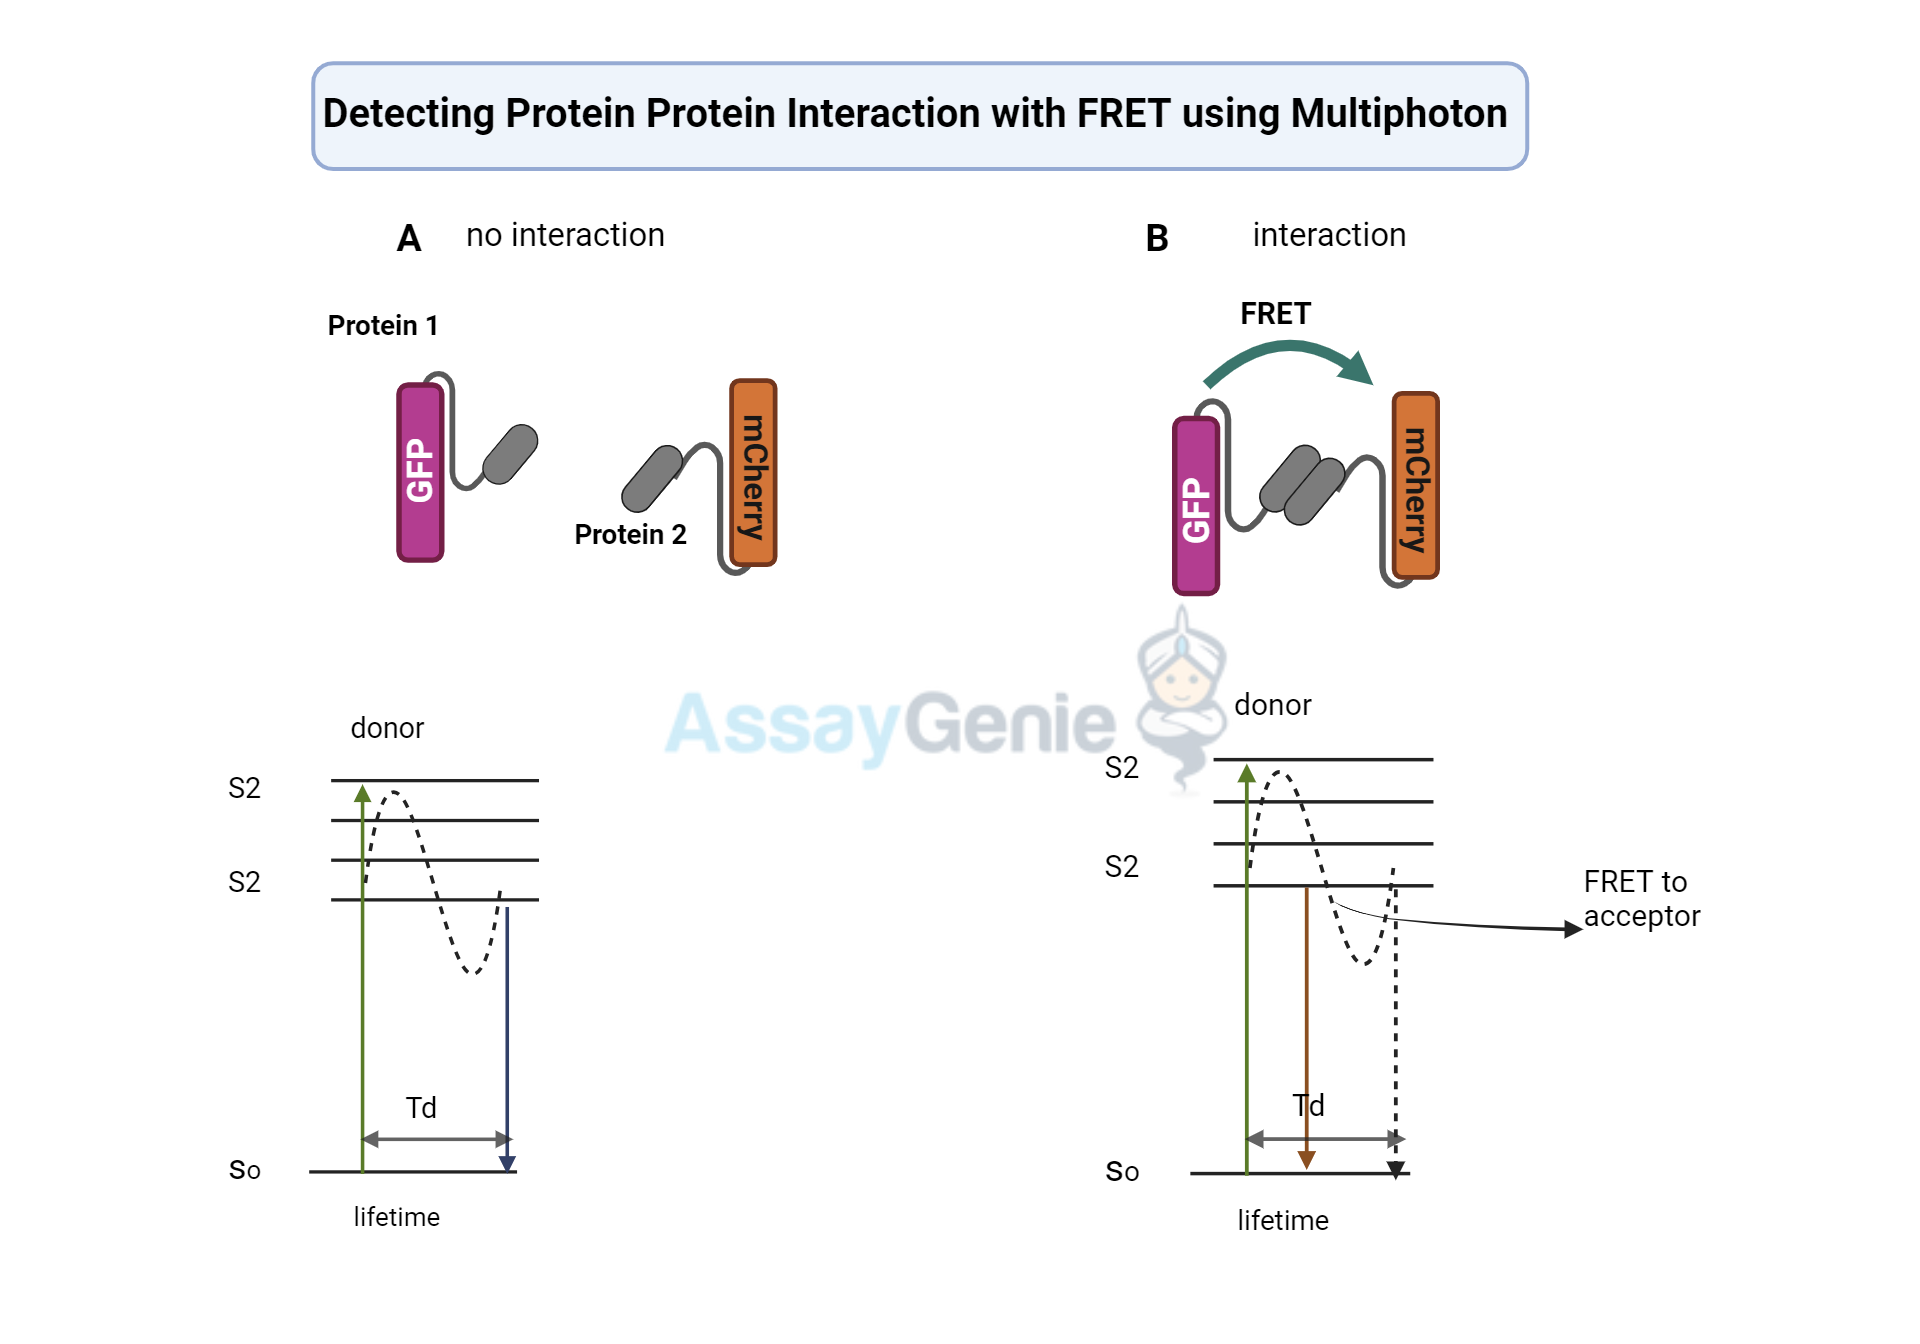 Protein Protein Interaction detection using FRET